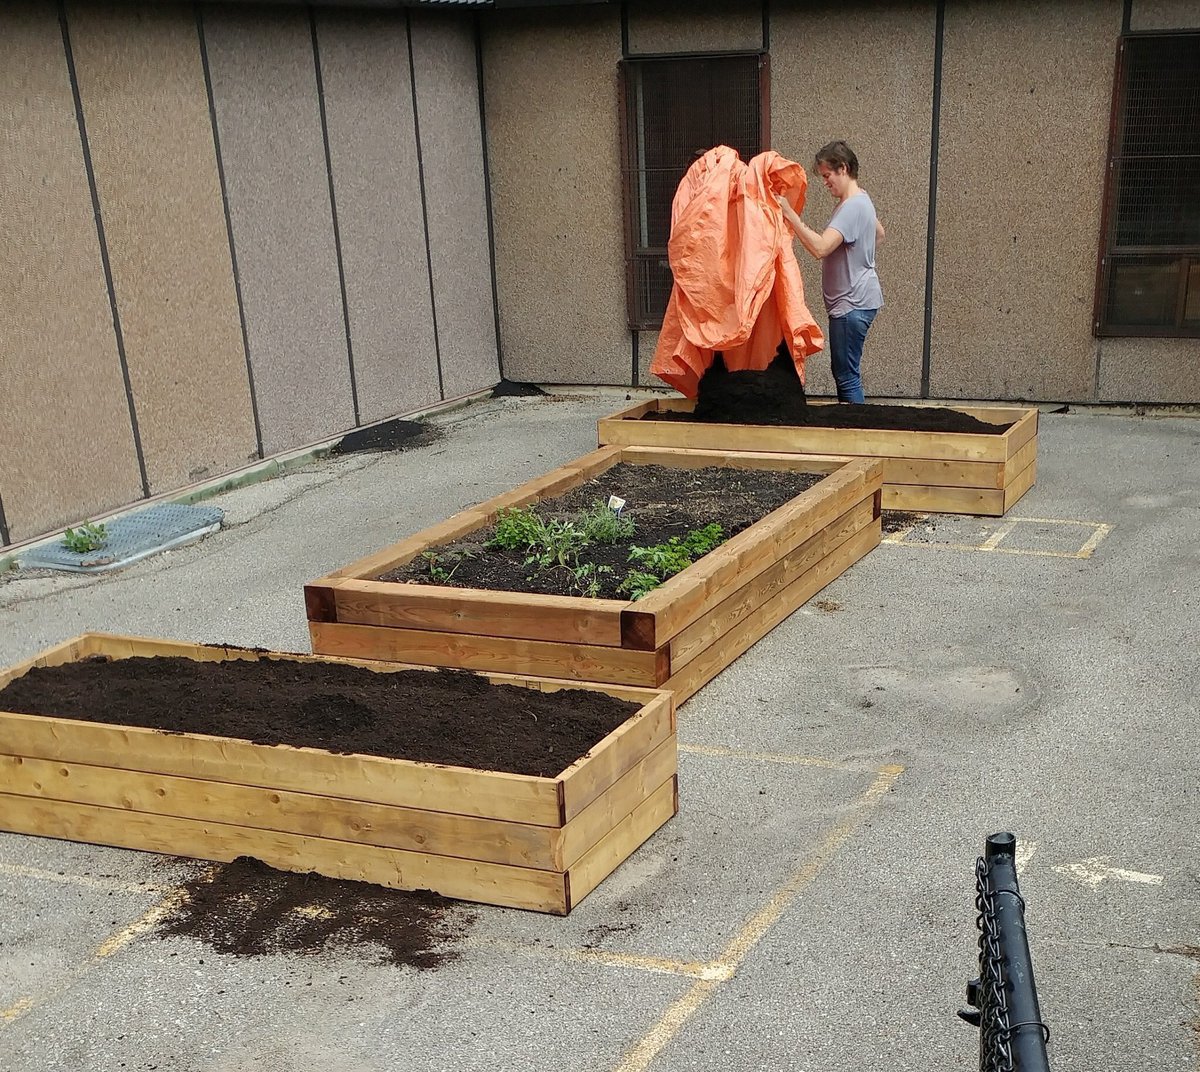 Soil delivery from @EcosourceGreen. Thank you to @miwald26 and Mr. Holmstrom and Kat and Laura from Eco Source for your hard work filling the raised beds at Settler’s! Next, EcoClub students planting milkweed and garlic. #positivepartnerships #greeninitiatives